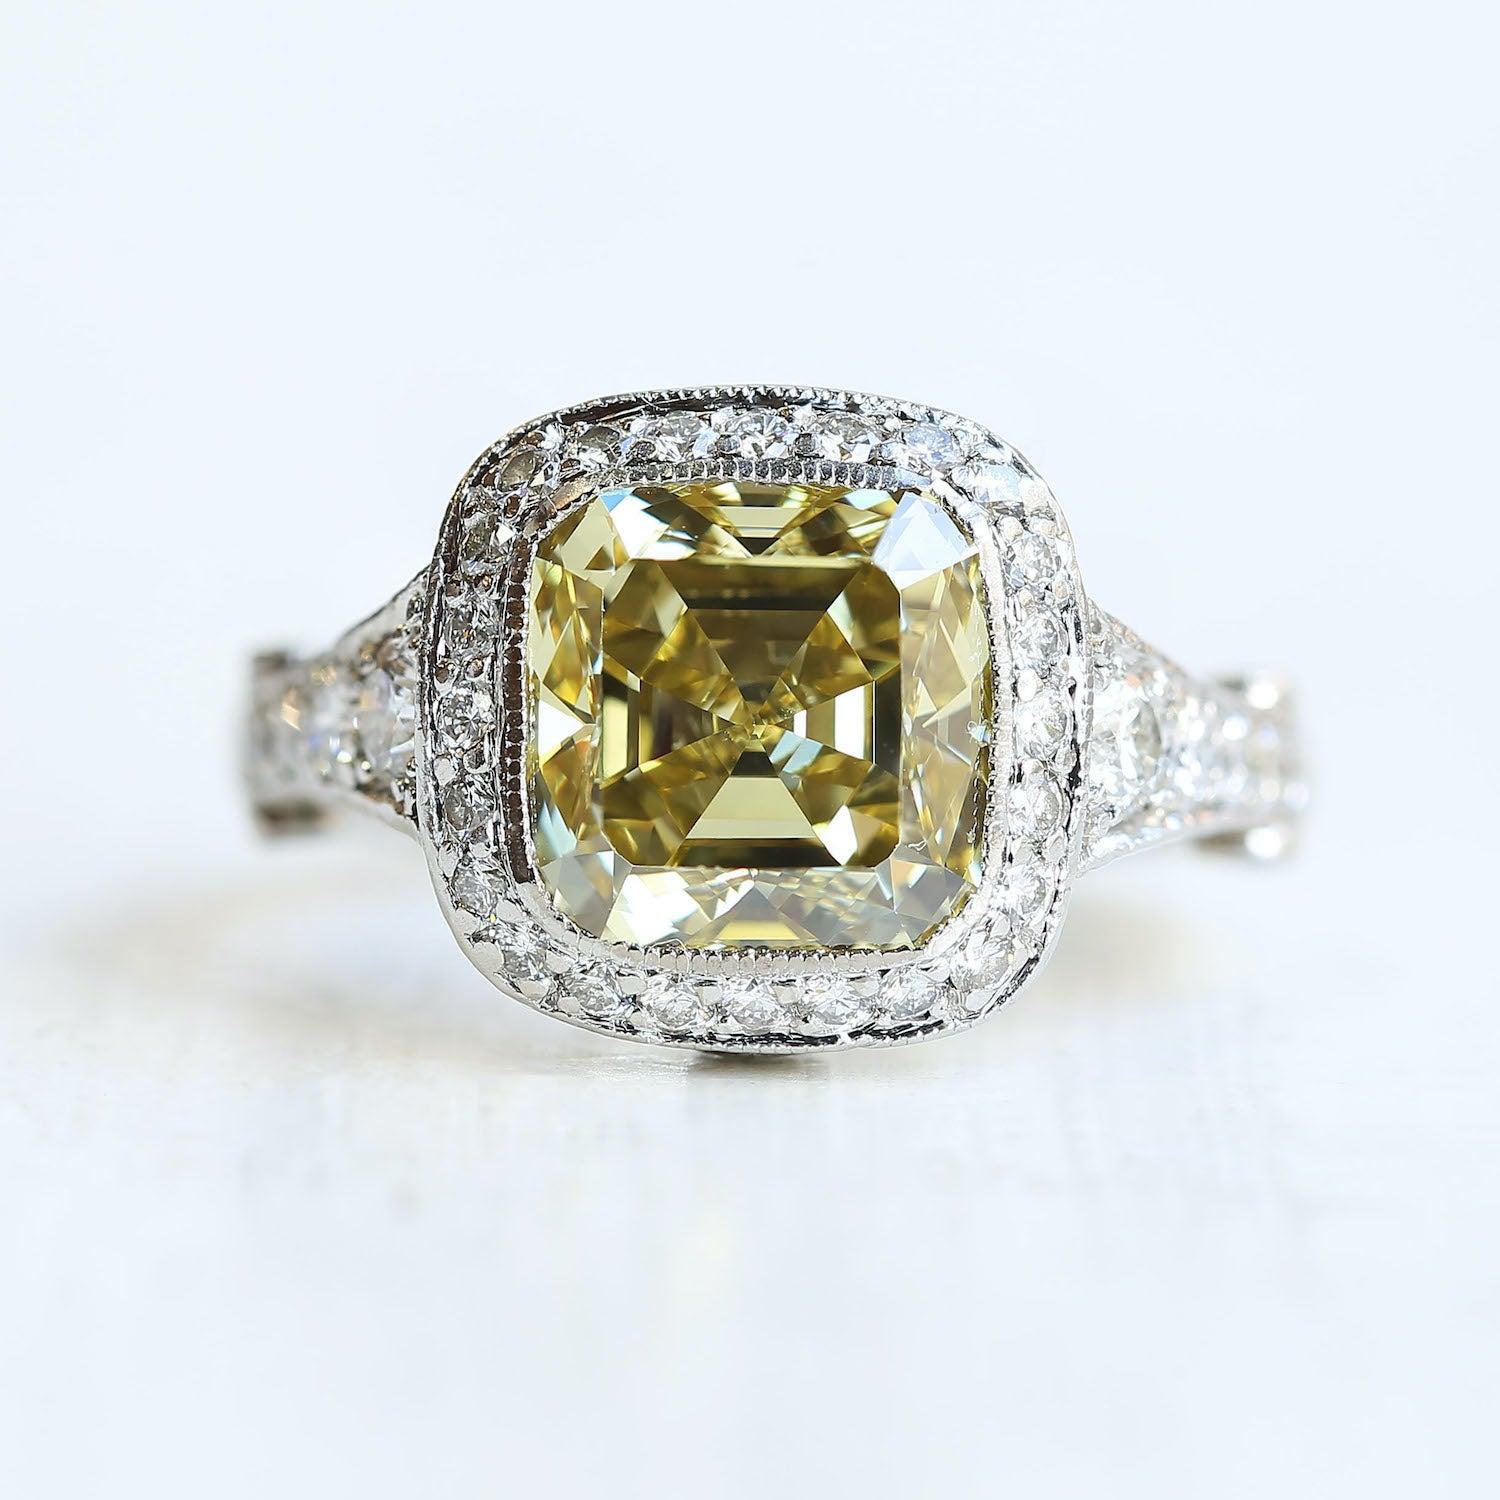 Tiffany & Co. Legacy 4.00 Carat Fancy Intense Yellow Diamond Engagement Ring For Sale 3